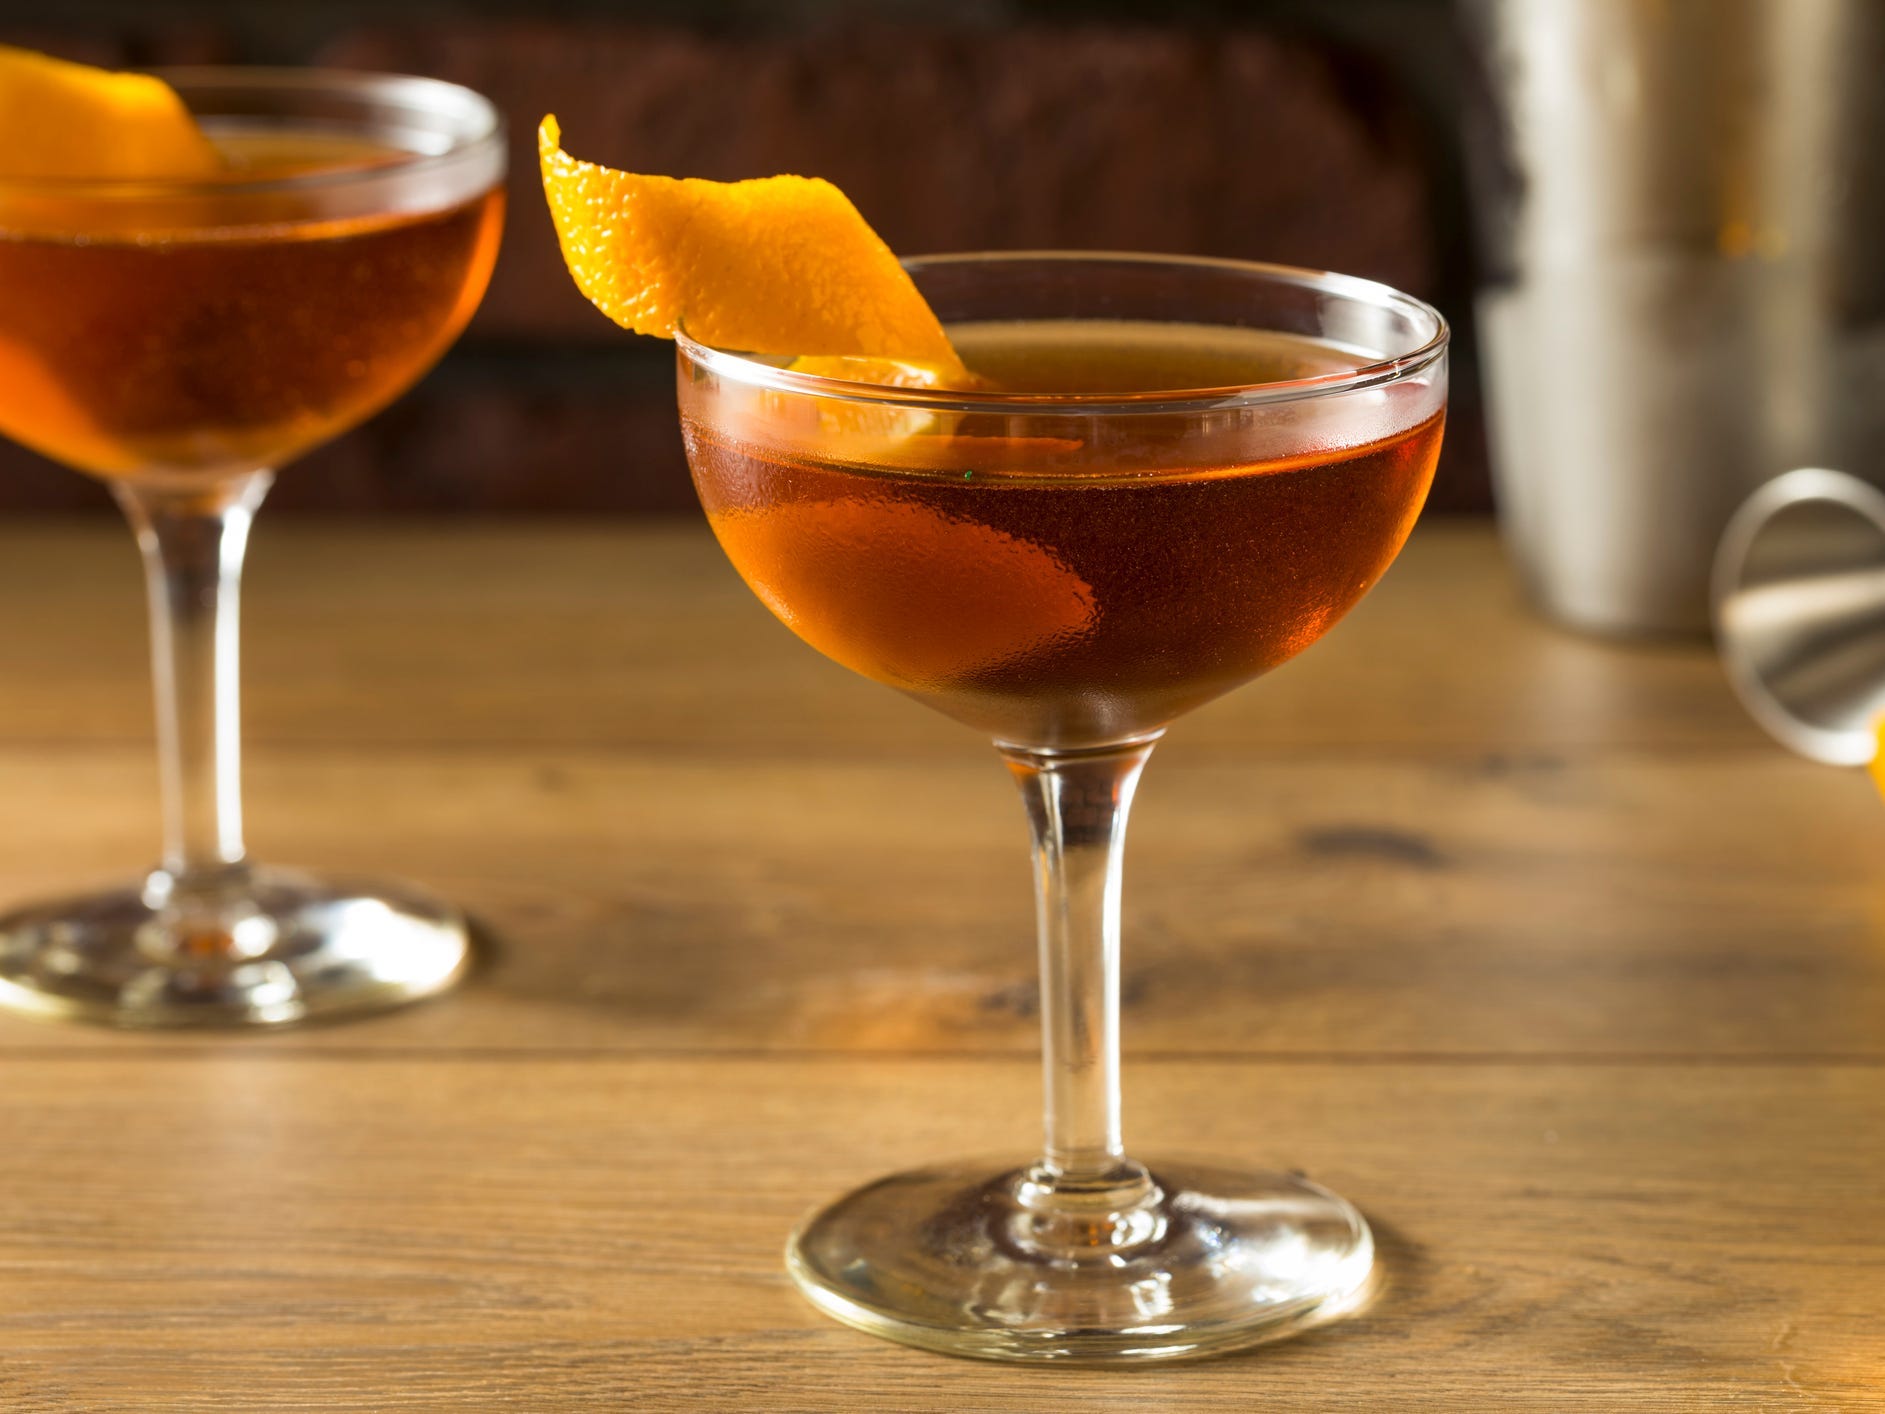 Two glasses of Martinez gin cocktail with orange twists.